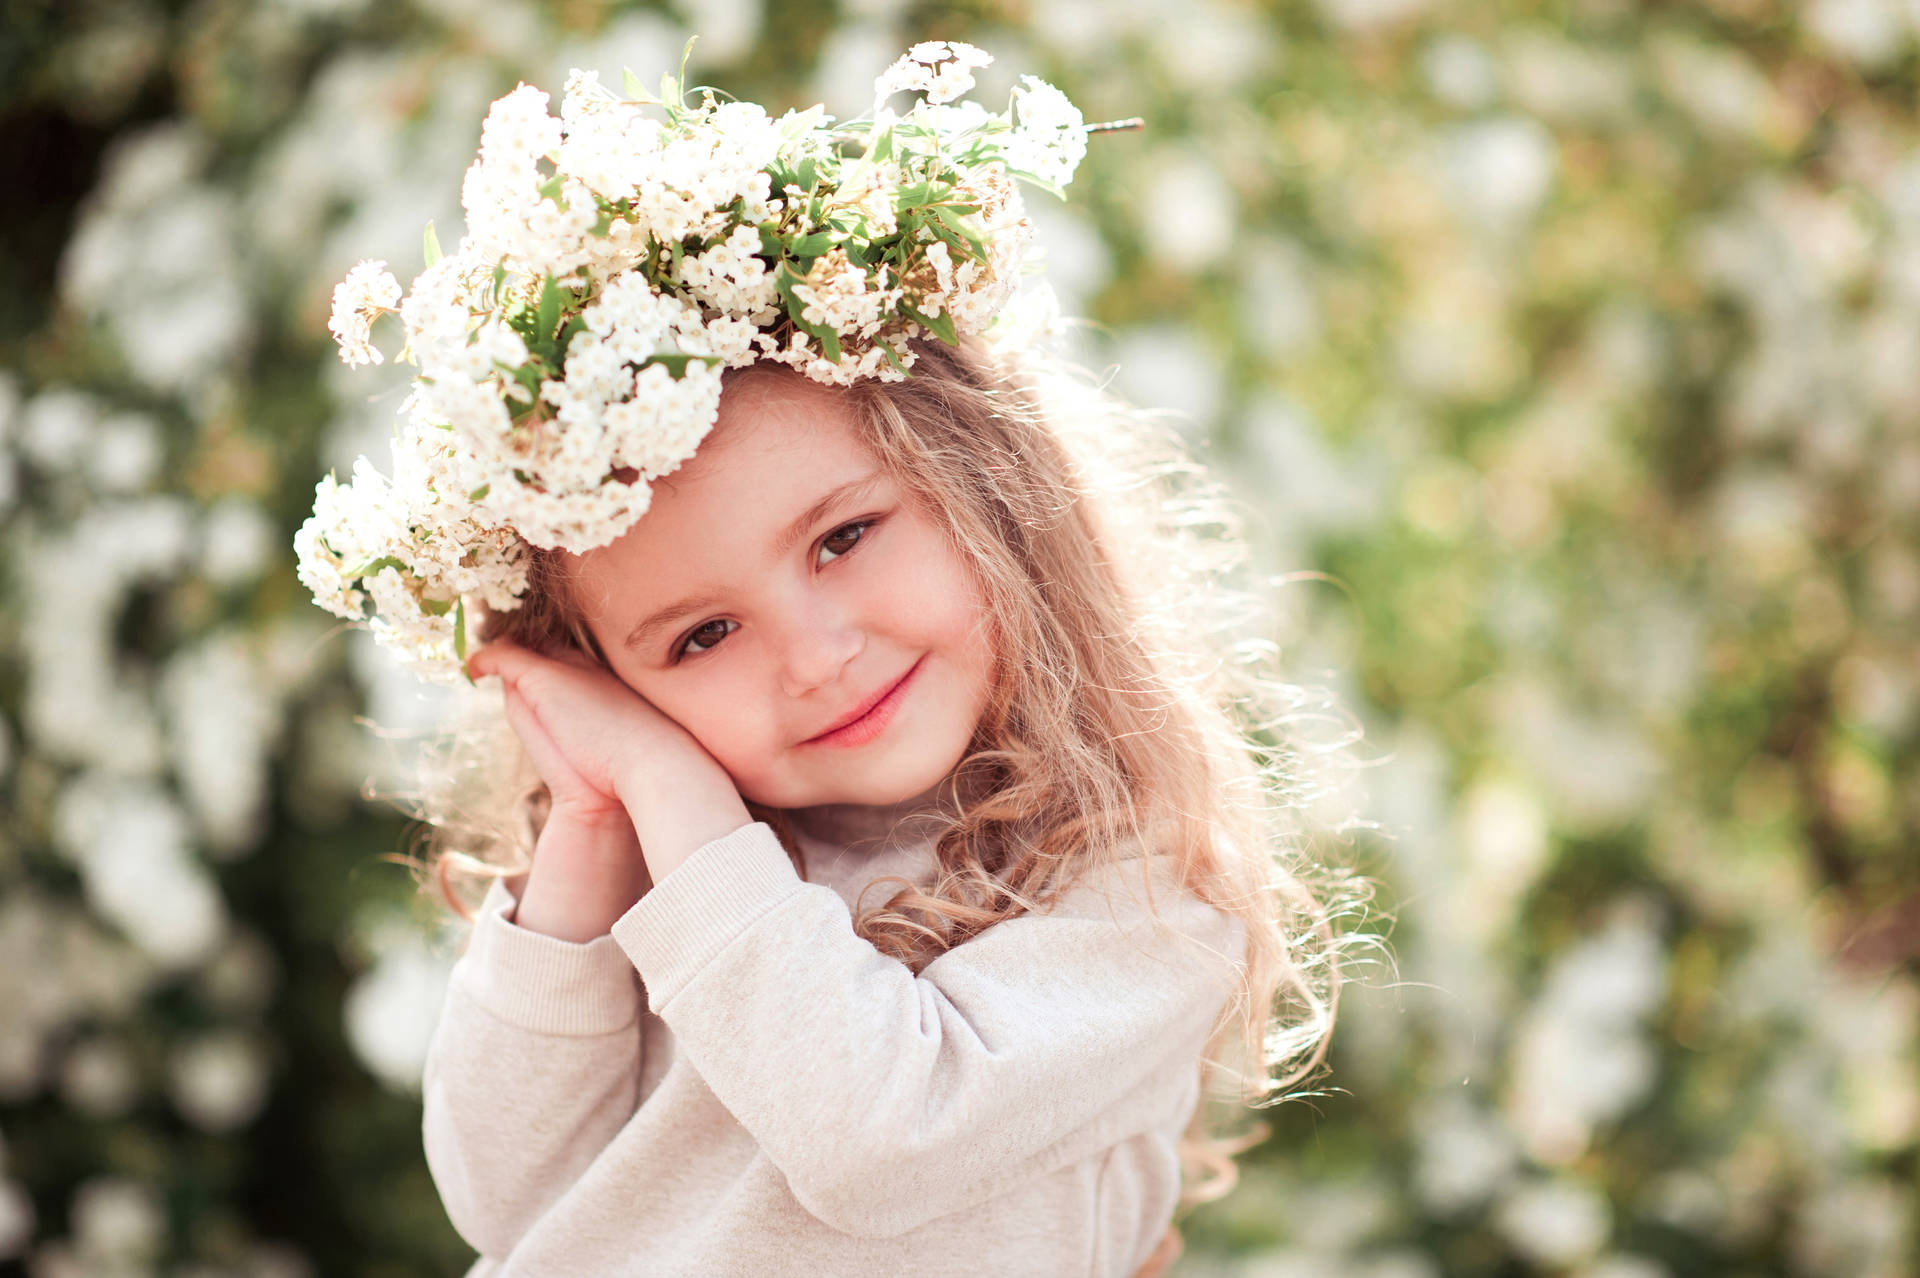 Young Cute Girl With White Floral Crown Background